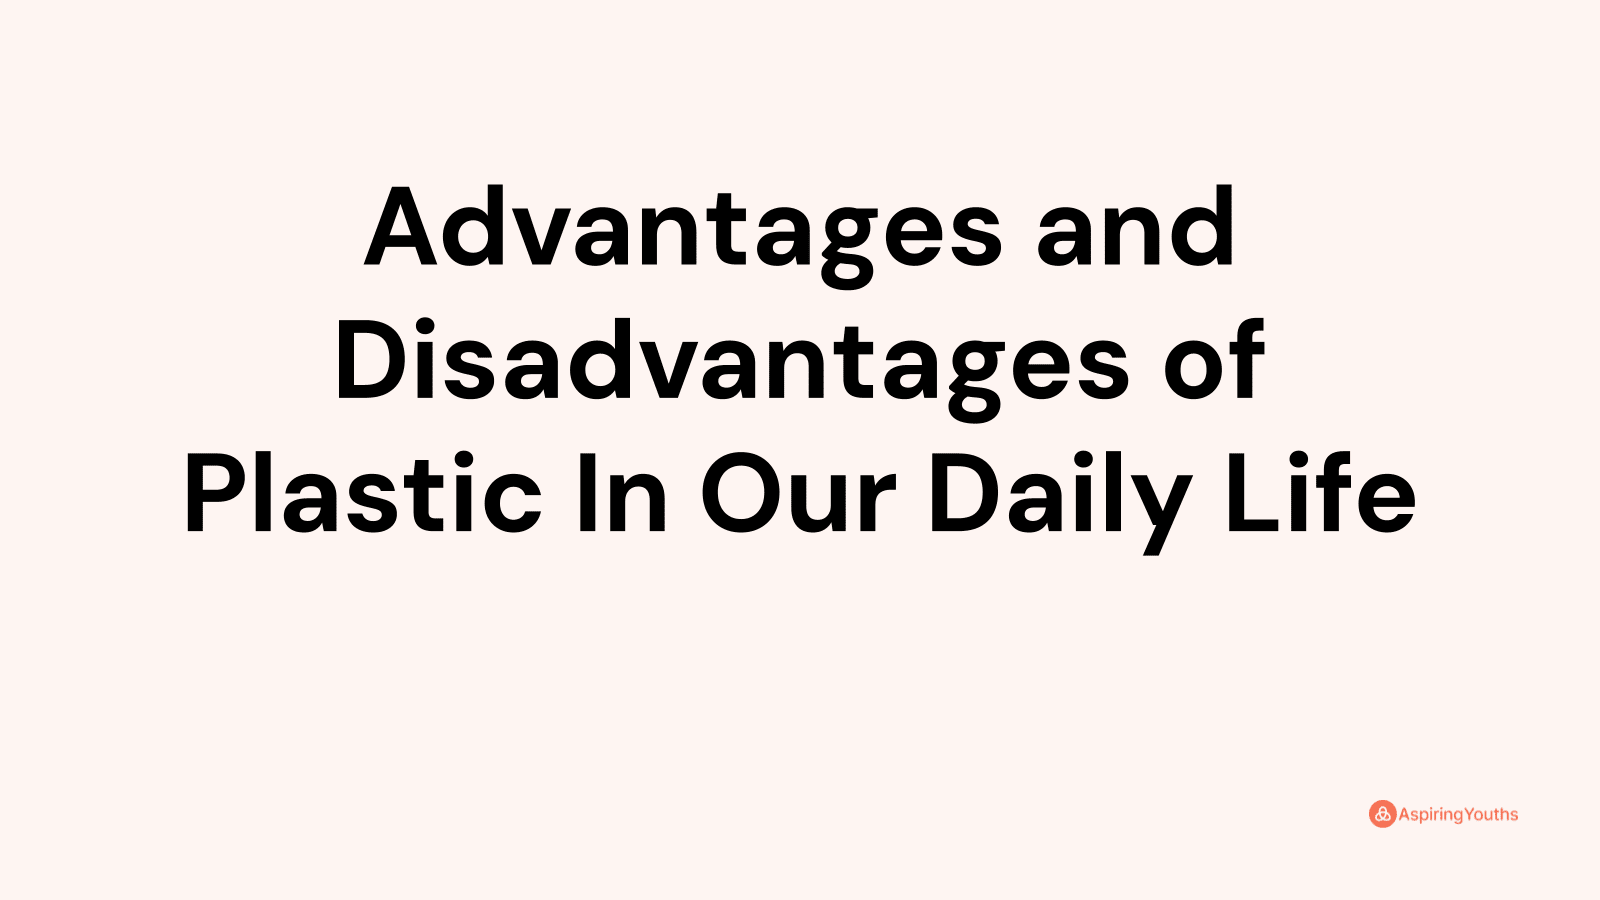 Advantages and disadvantages of Plastic In Our Daily Life